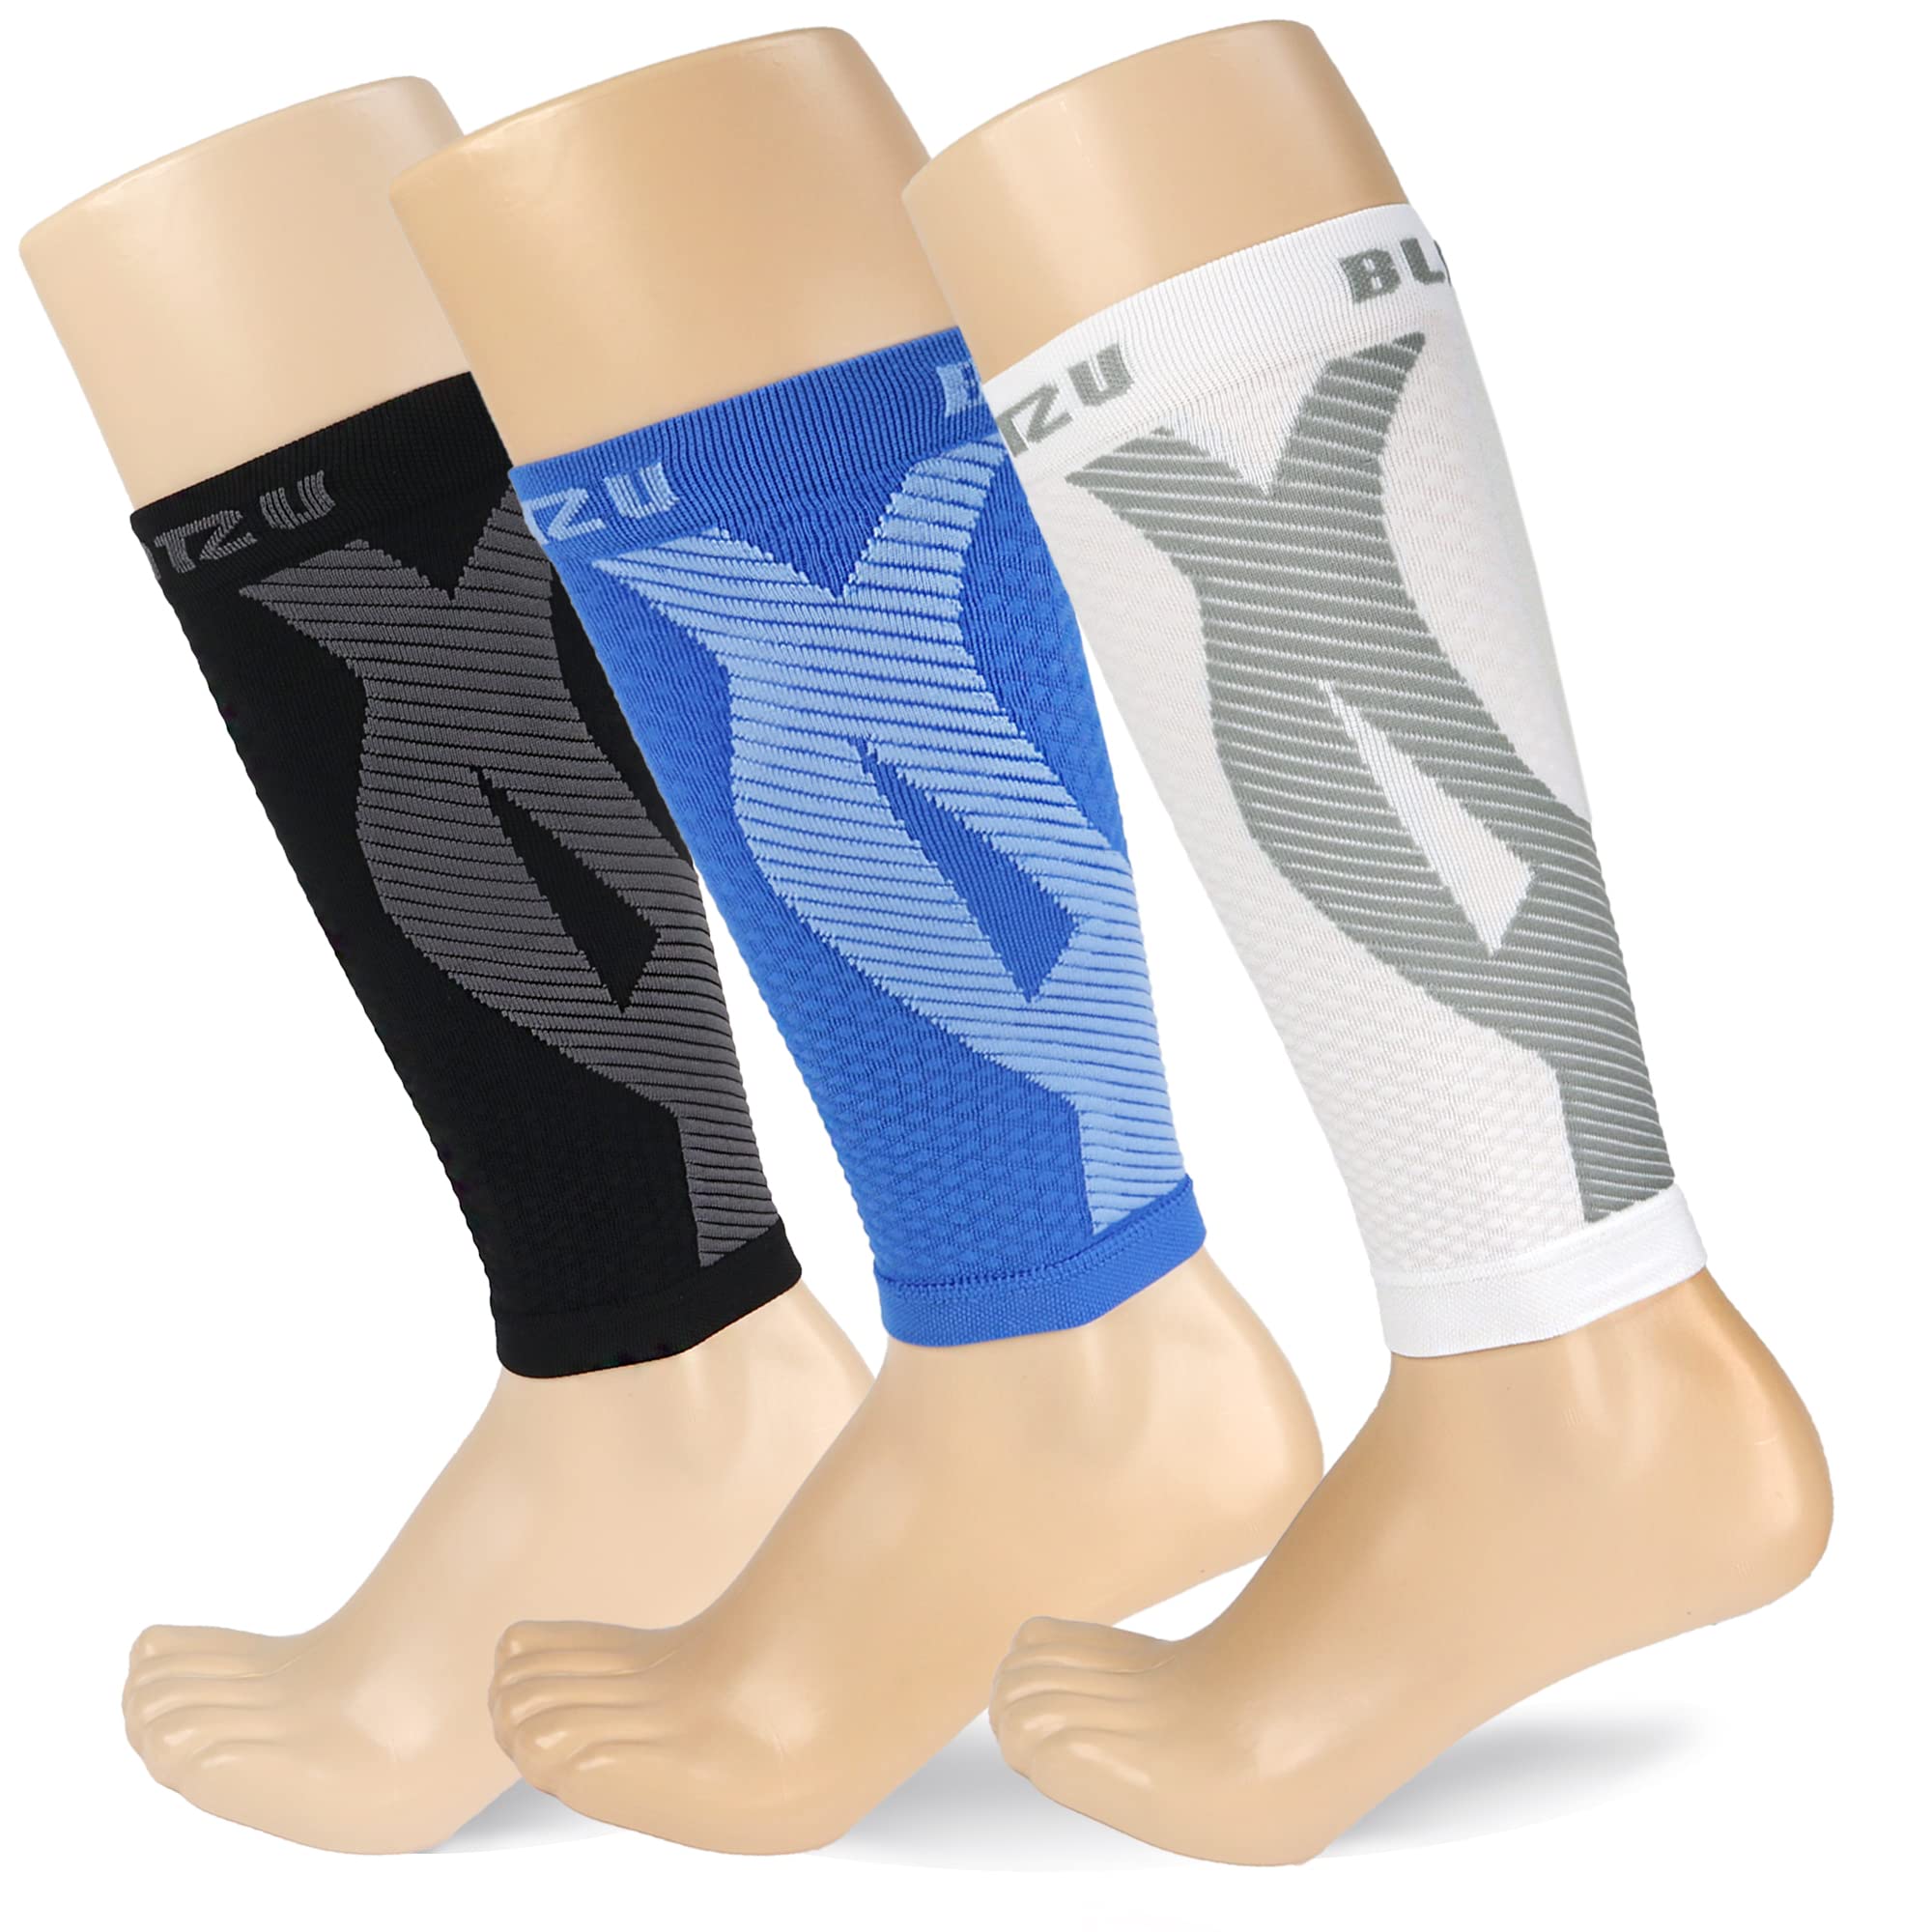 Calf Compression Sleeves for Men Women, Footless Compression Socks